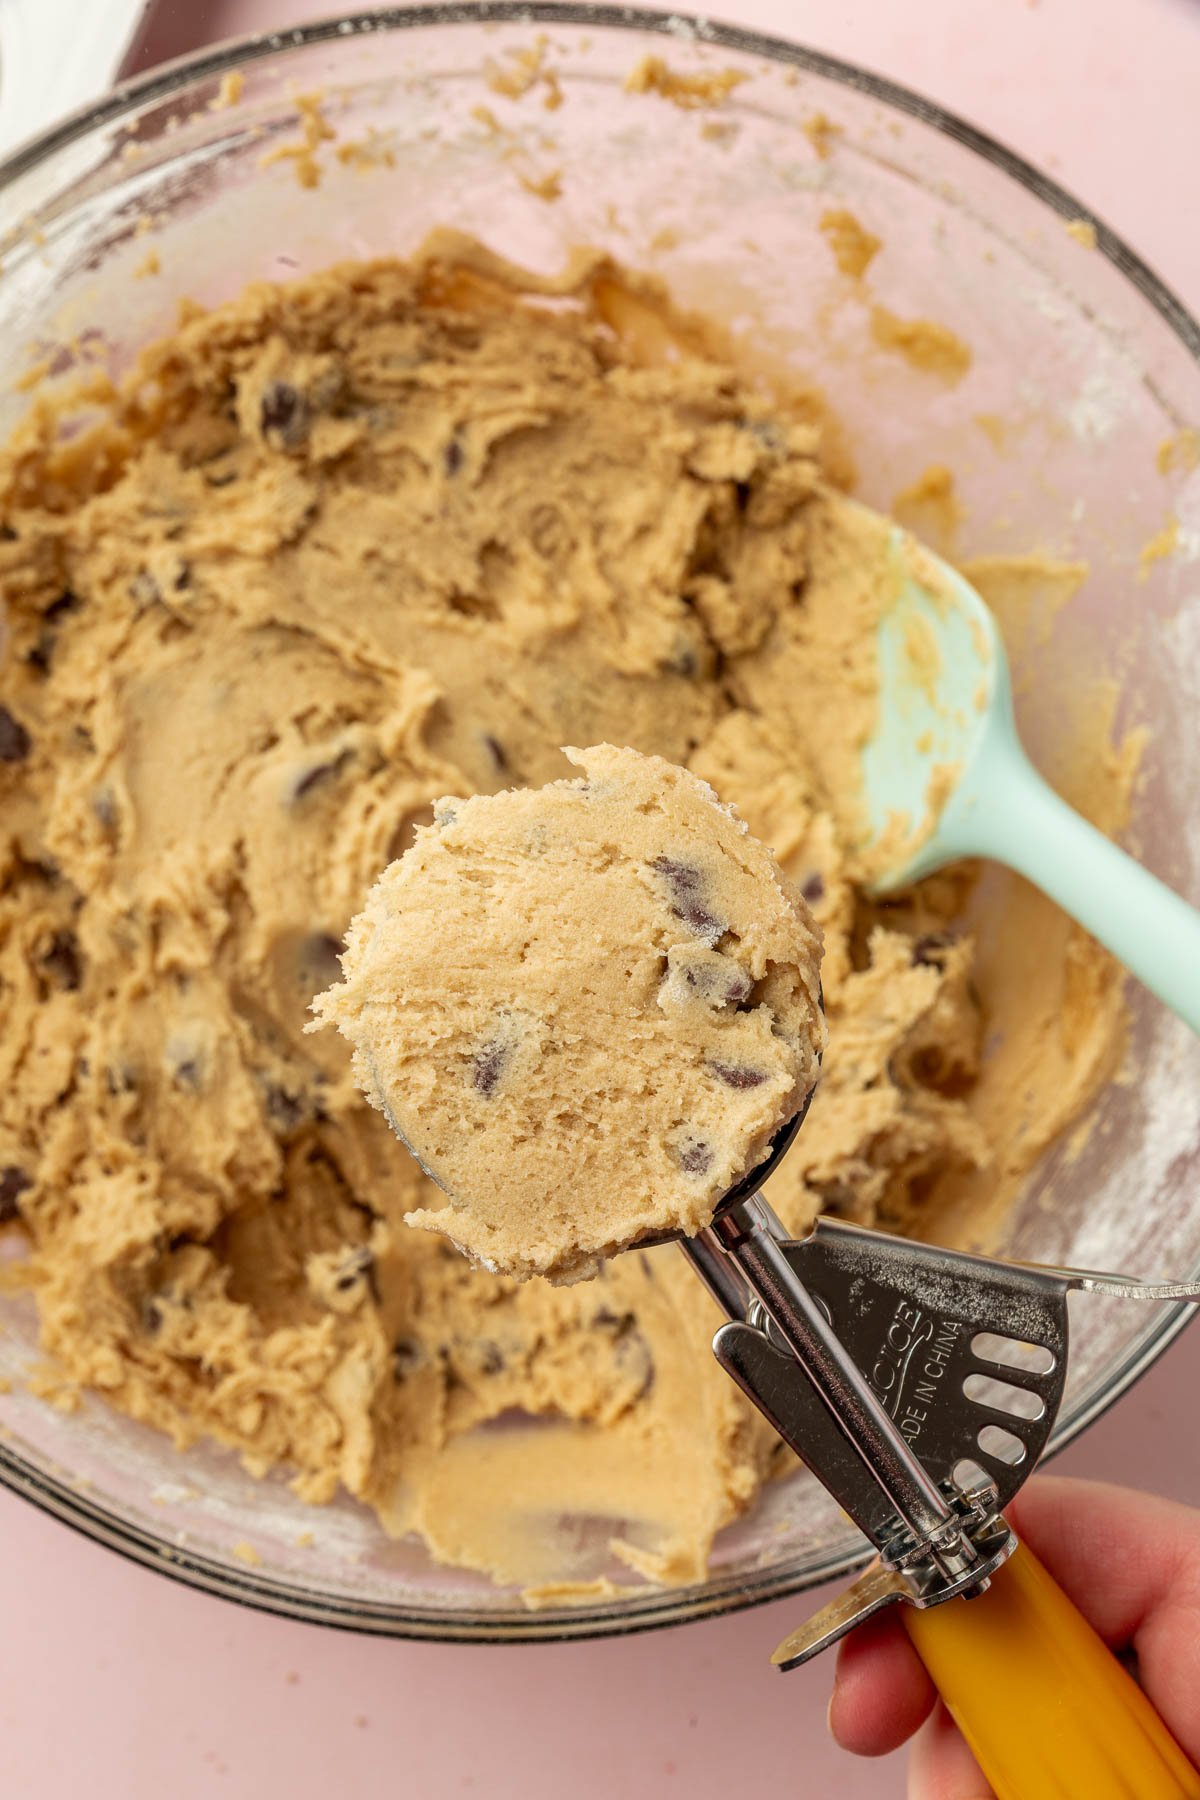 A portion scoop filled with gluten-free chocolate chip cookie dough over a glass mixing bowl of additional cookie dough.